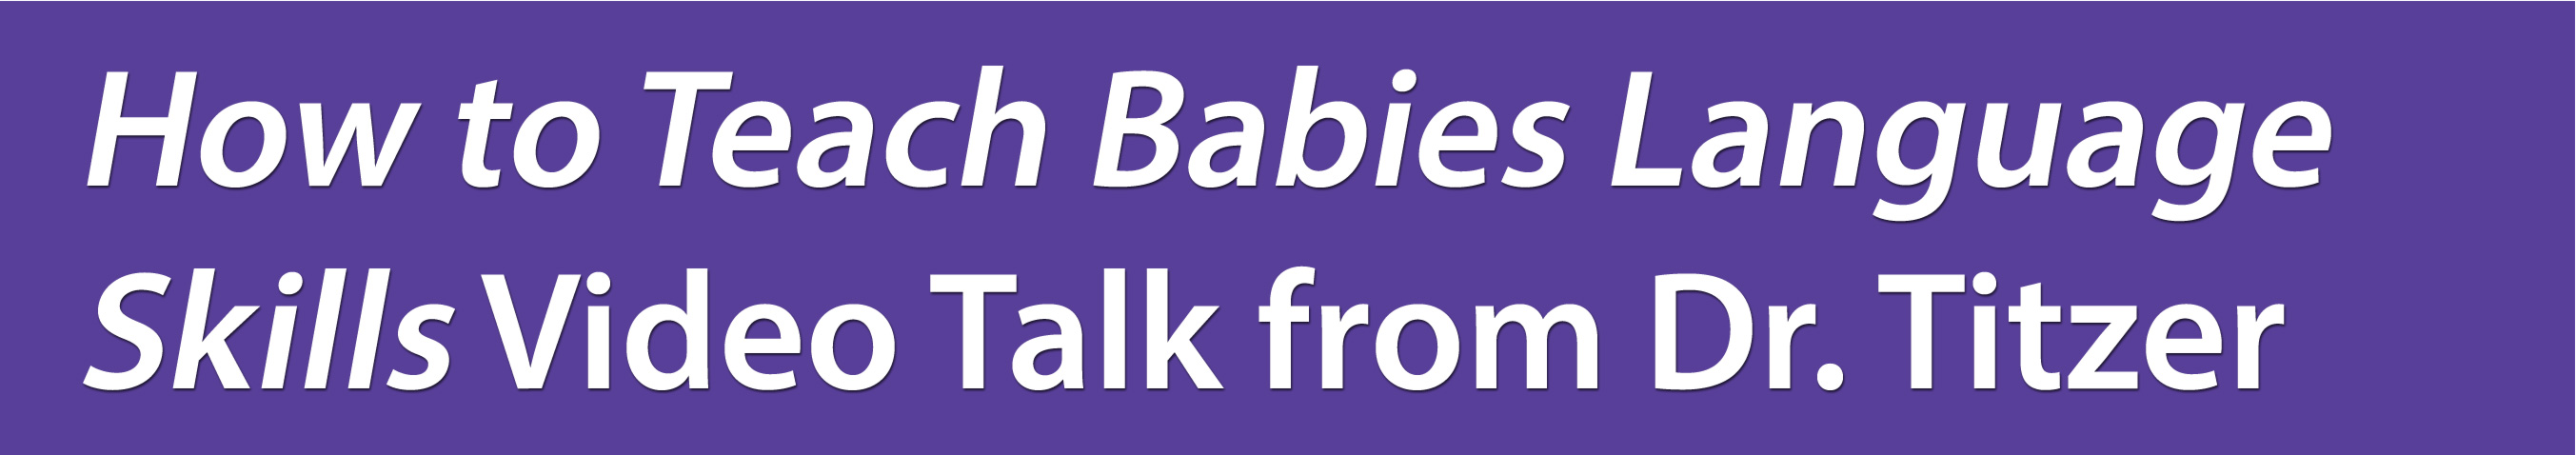 How to Teach Babies Language Skills video presentation from Dr. Titzer